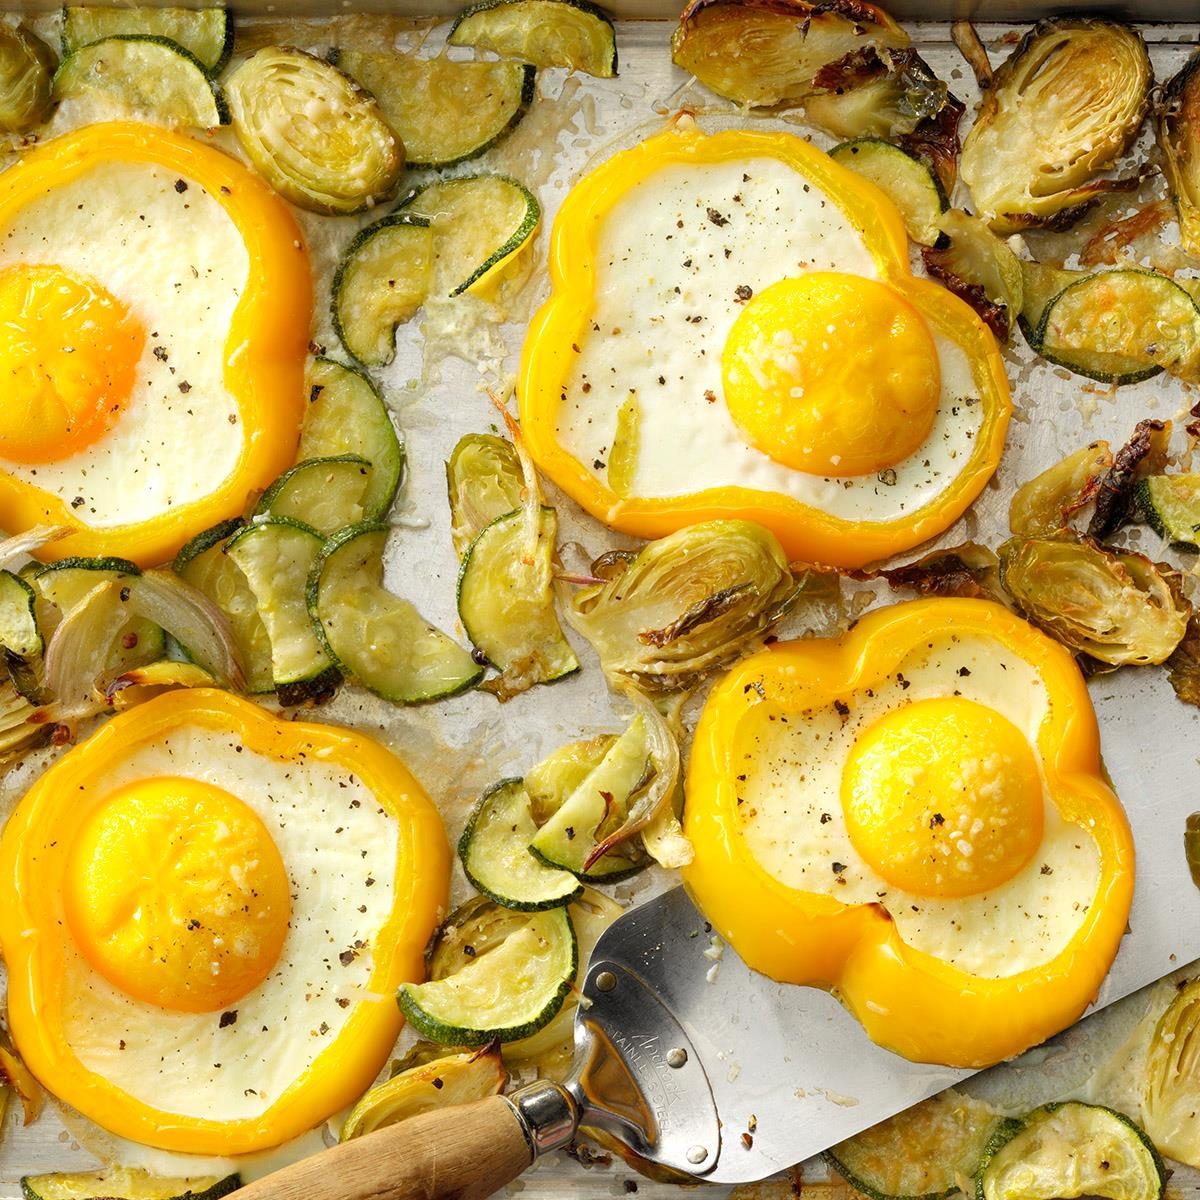 Sheet Pan Eggs (How to Fry Eggs in the Oven) - Key To My Lime